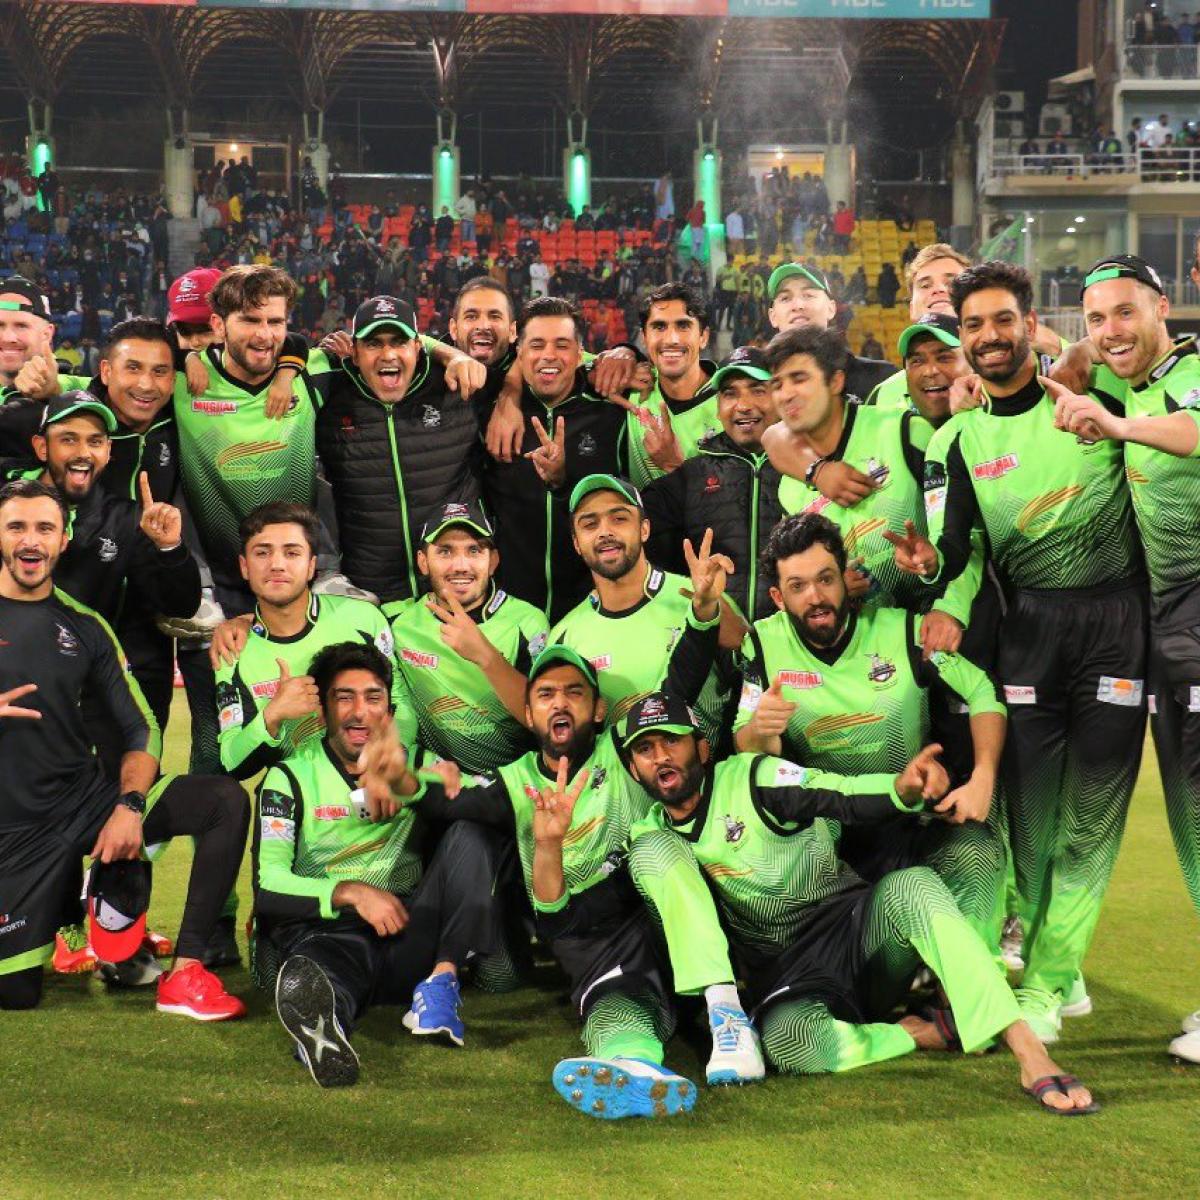 Many T20 leagues like PSL, CPL and others have six teams and follow format of 10-team IPL.